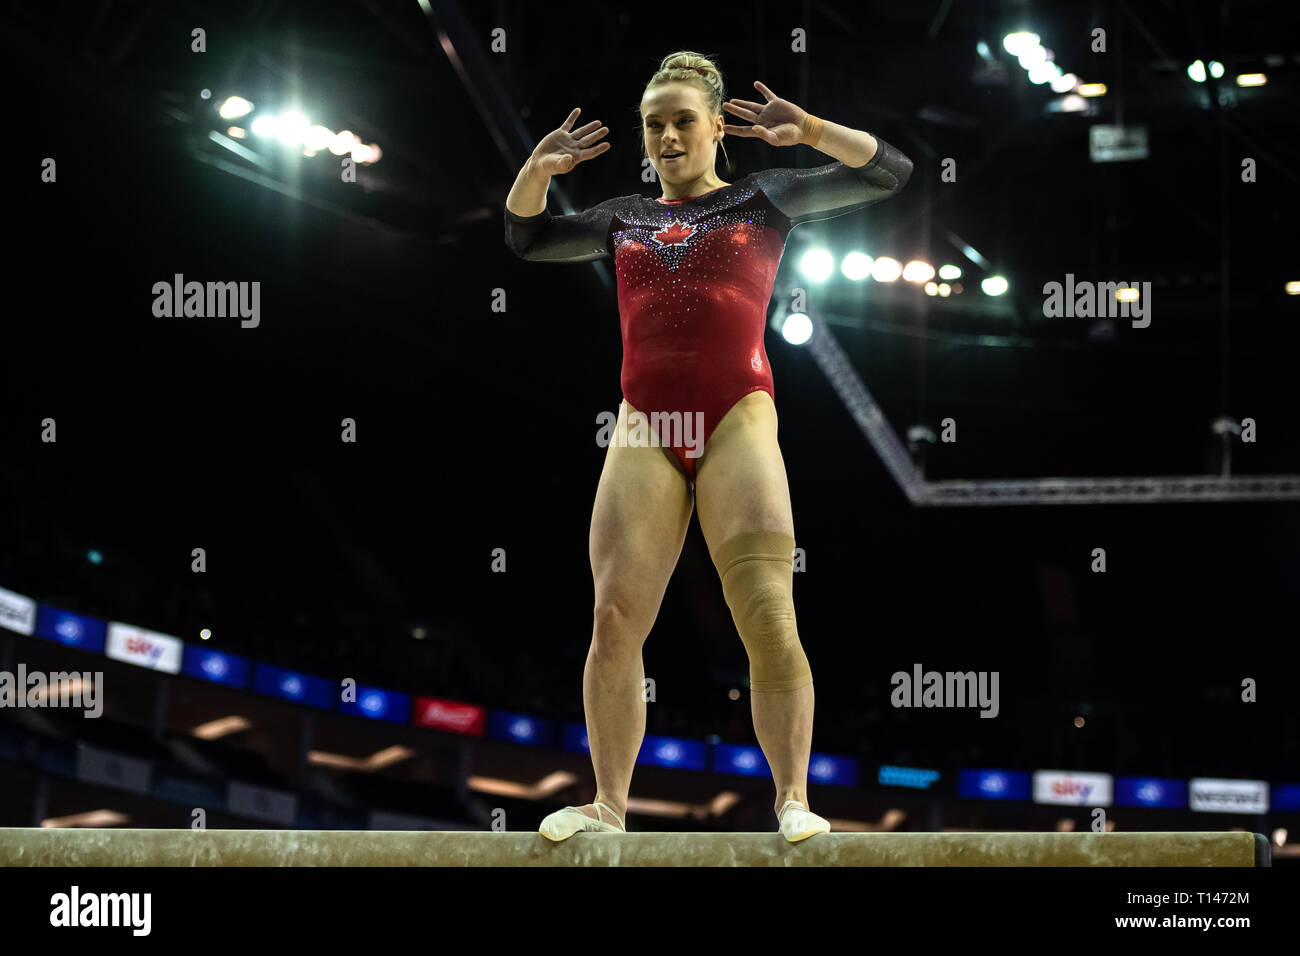 London, UK. 23rd March, 2019. Ellie Black of Canada performs on the Beam during the Matchroom Multisport presents the 2019 Superstars of Gymnastics at The O2 Arena on Saturday, 23 March 2019. LONDON ENGLAND. Credit: Taka G Wu/Alamy News Stock Photo